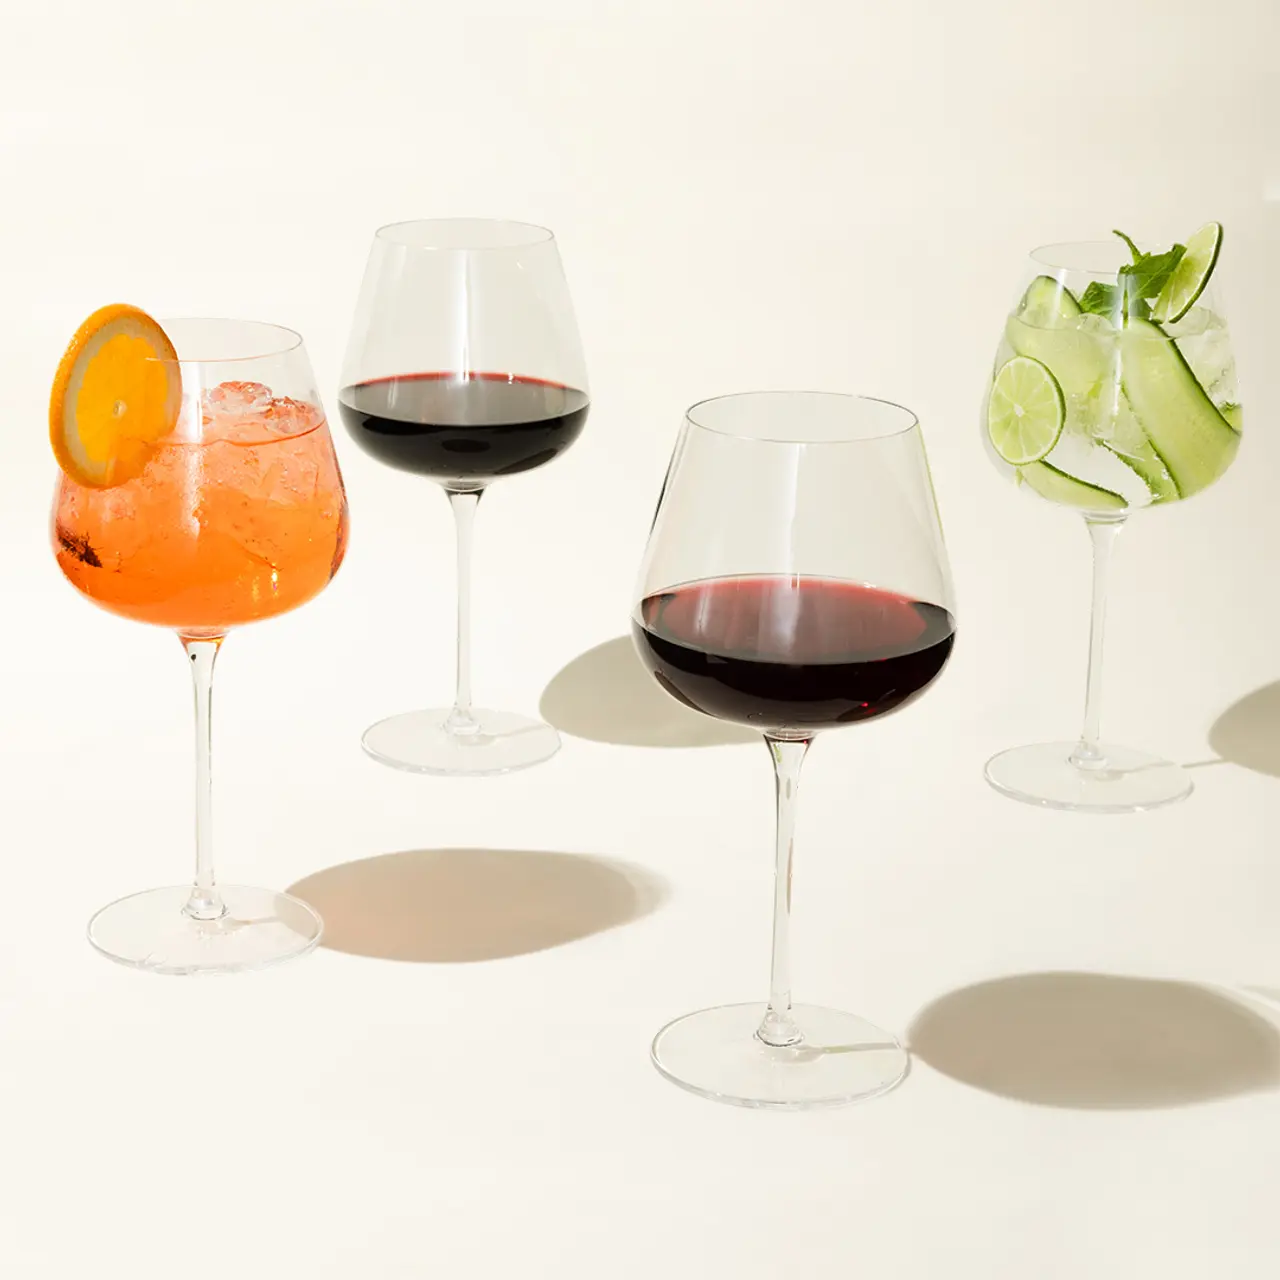 Four different types of drinks, including what appears to be a spritz, two red wines, and a gin and tonic, are displayed in elegant stemware against a neutral background.